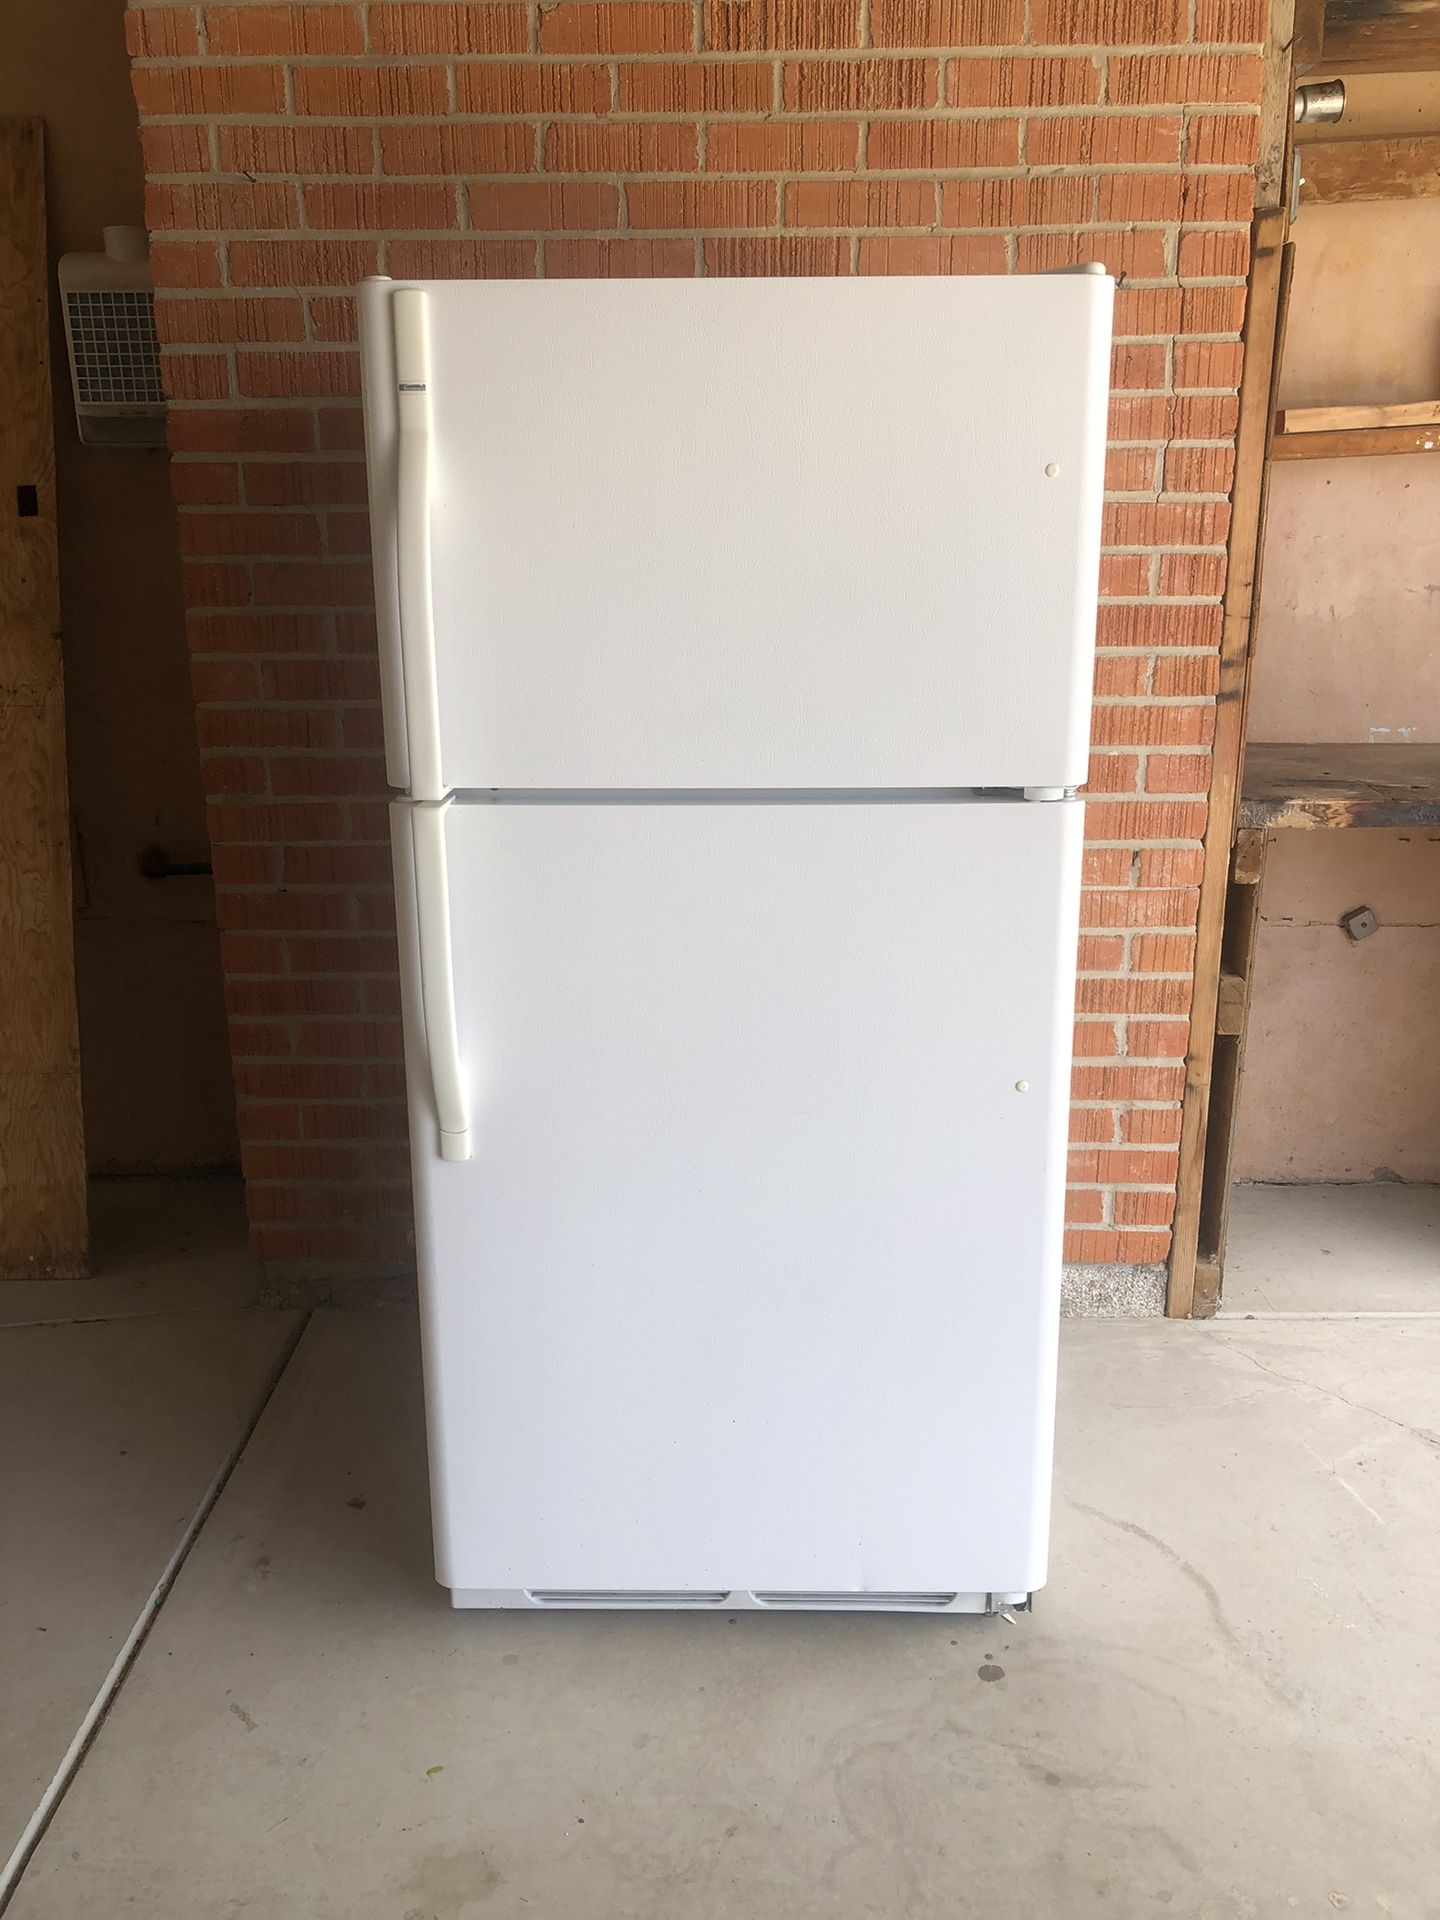 Compact, Upright Kenmore Refrigerator/Freezer - Works Great!